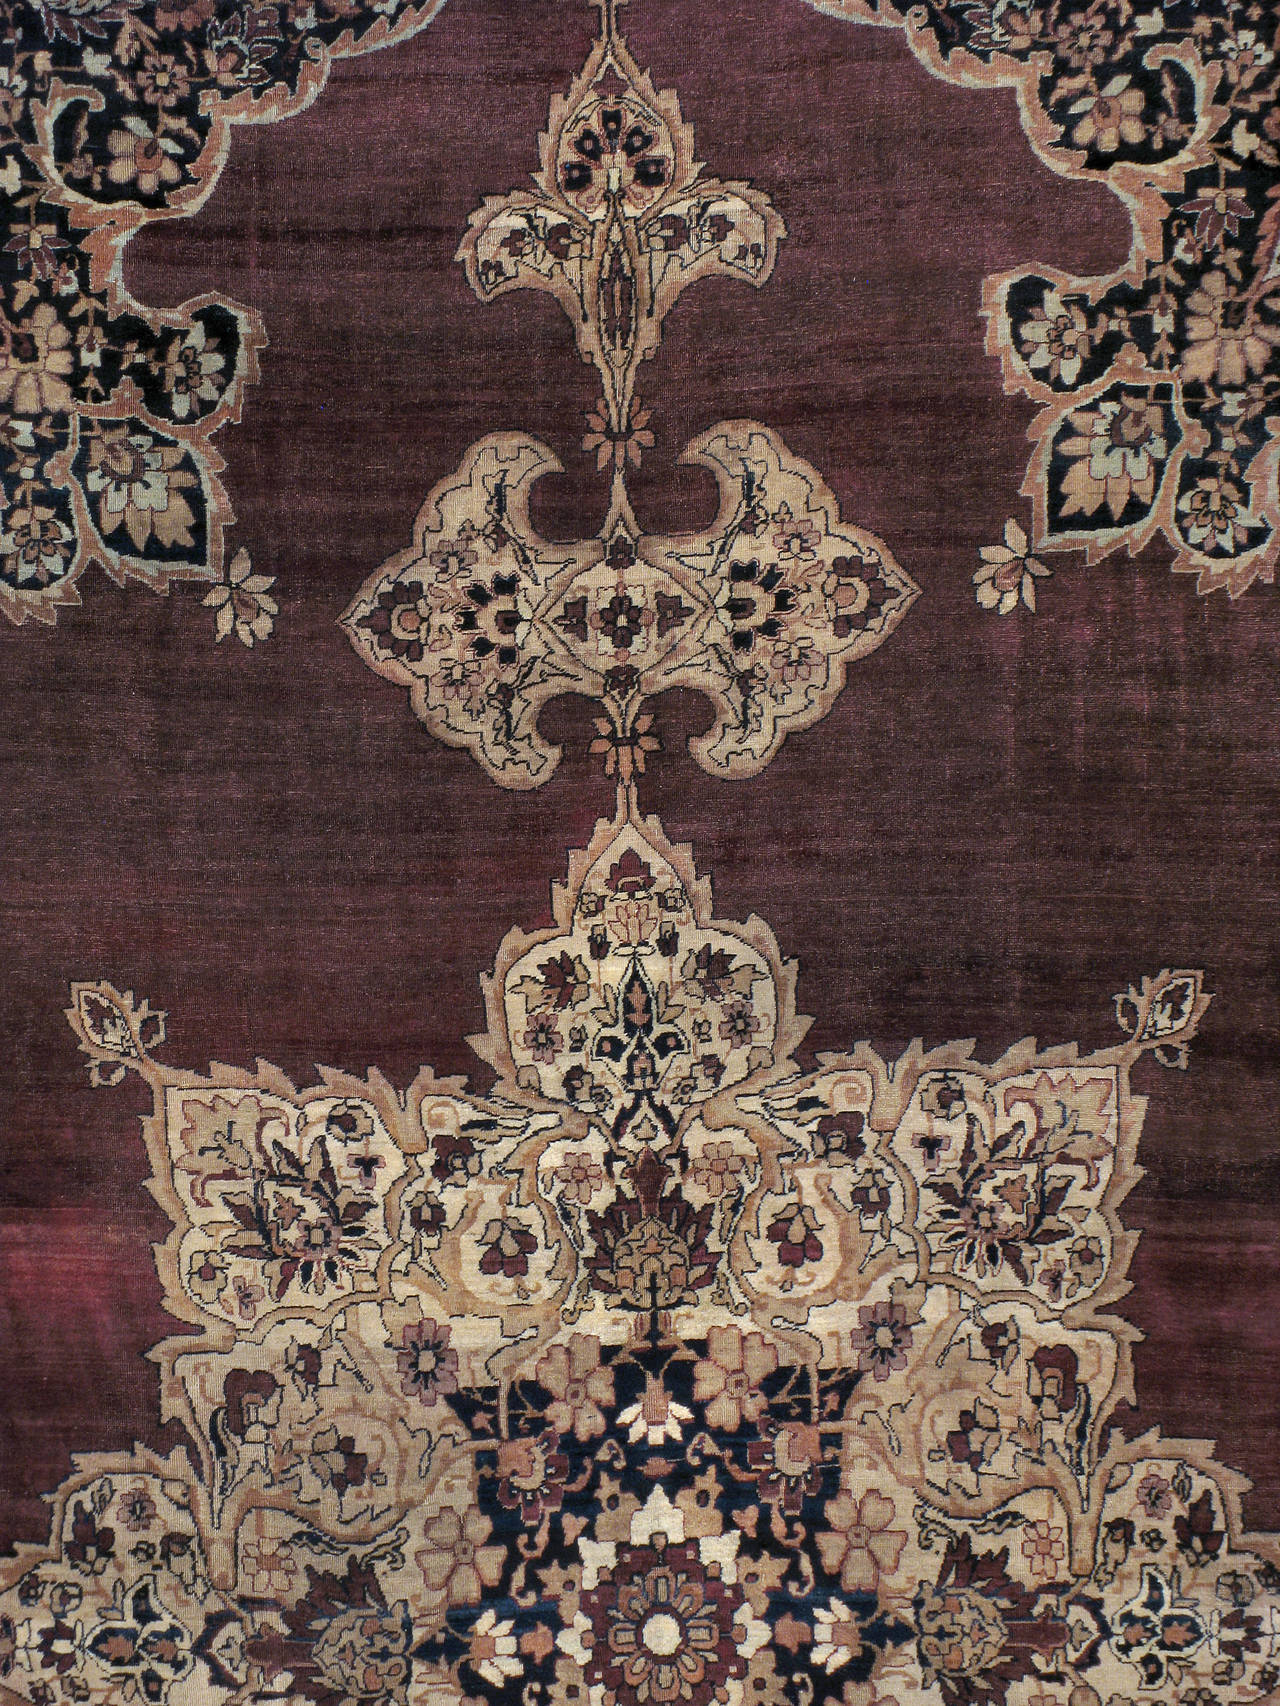 An antique Persian Lavar Kerman carpet from the turn of the 20th century.